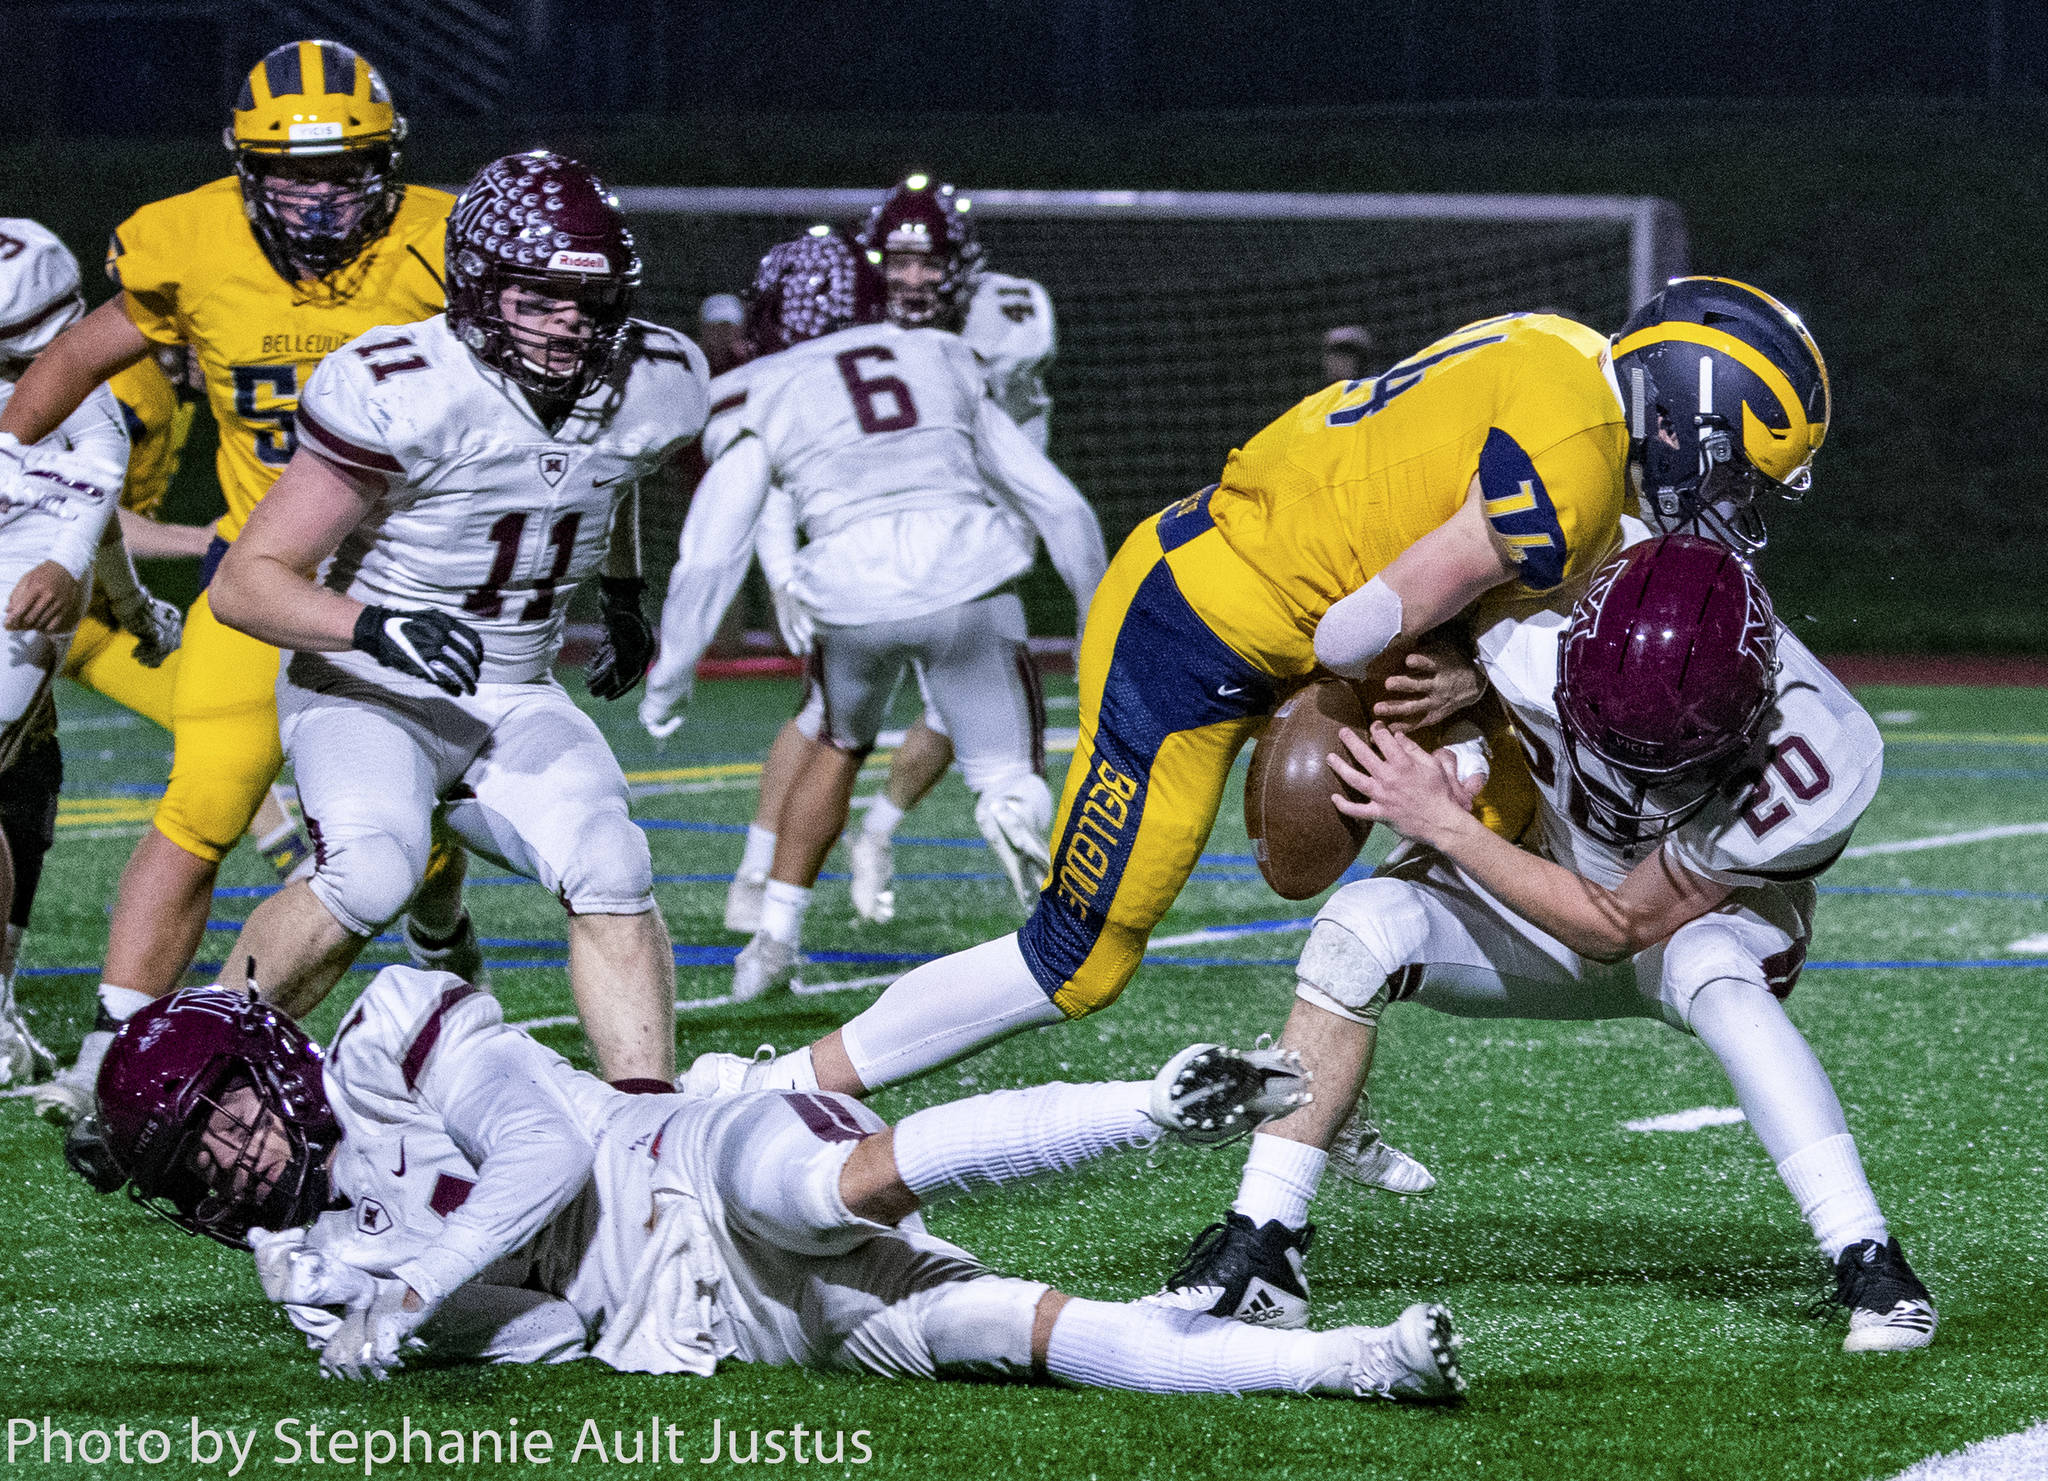 Mercer Island defensive back Carter Burr (20) forces Bellevue running back Alex Reid (14) to fumble the ball at the 1-yard line on Nov. 1. Photo courtesy of Stephanie Ault Justus